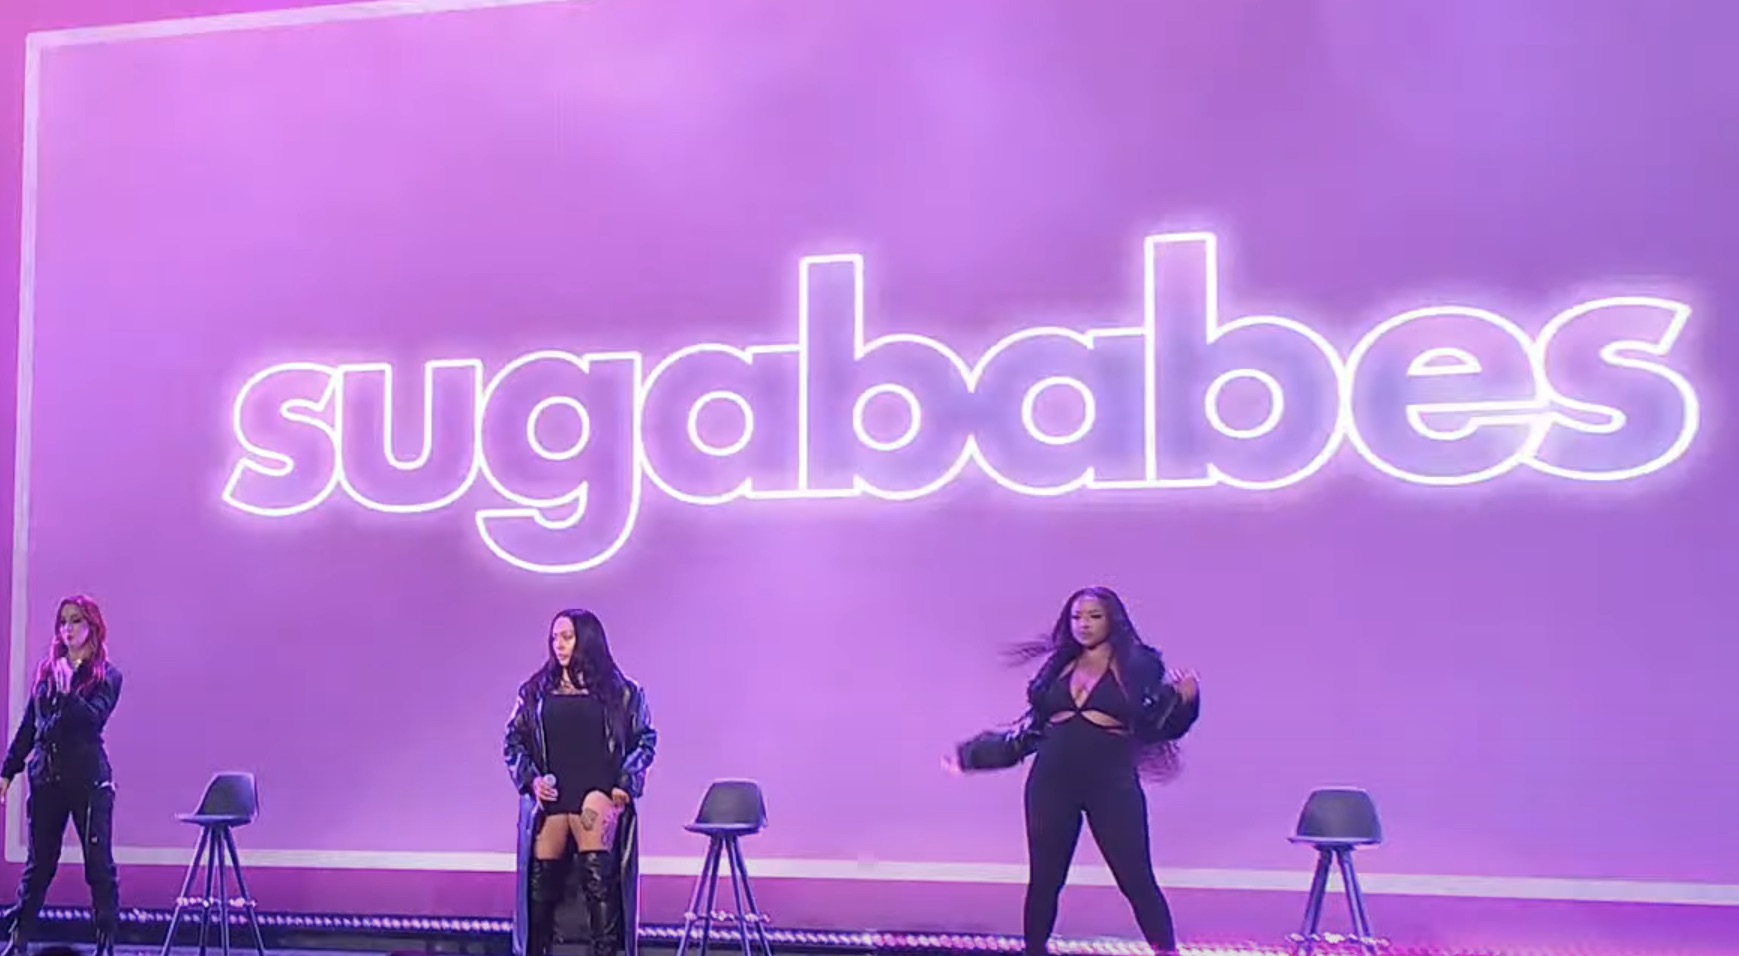 Watch: Sugababes Rock the MOBO Awards with Hits Medley to Celebrate Impact Honor